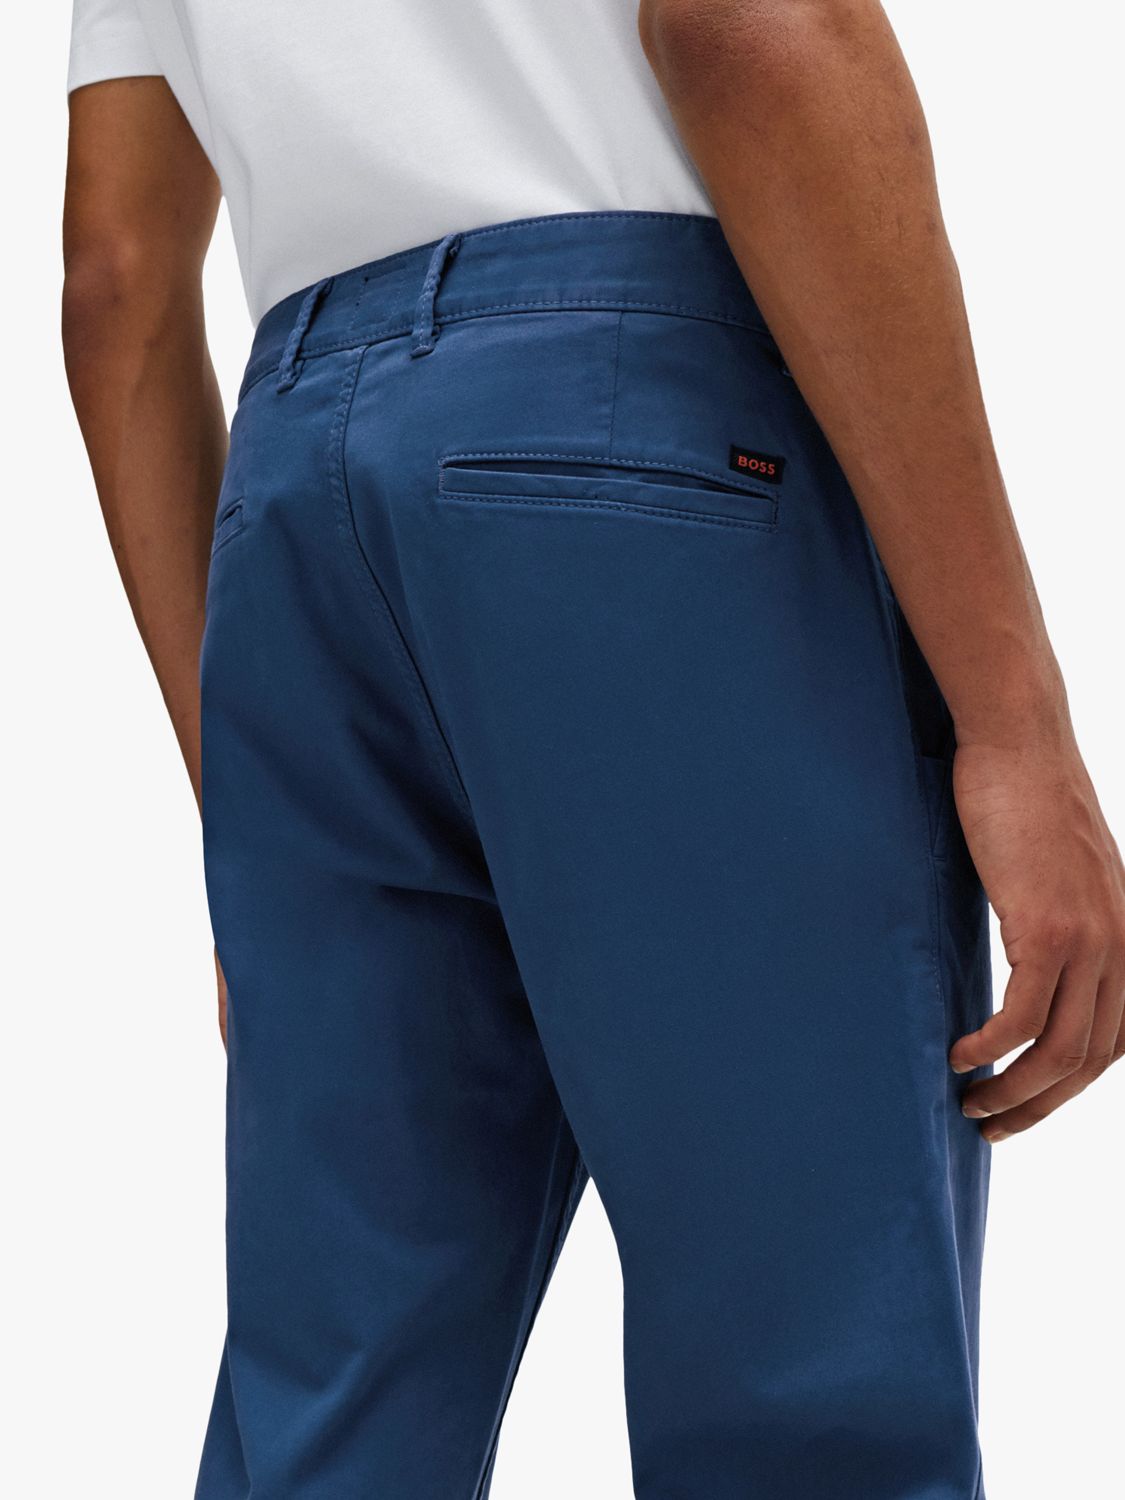 Buy BOSS Slim Fit Comfort Stretch Chinos, Navy Online at johnlewis.com